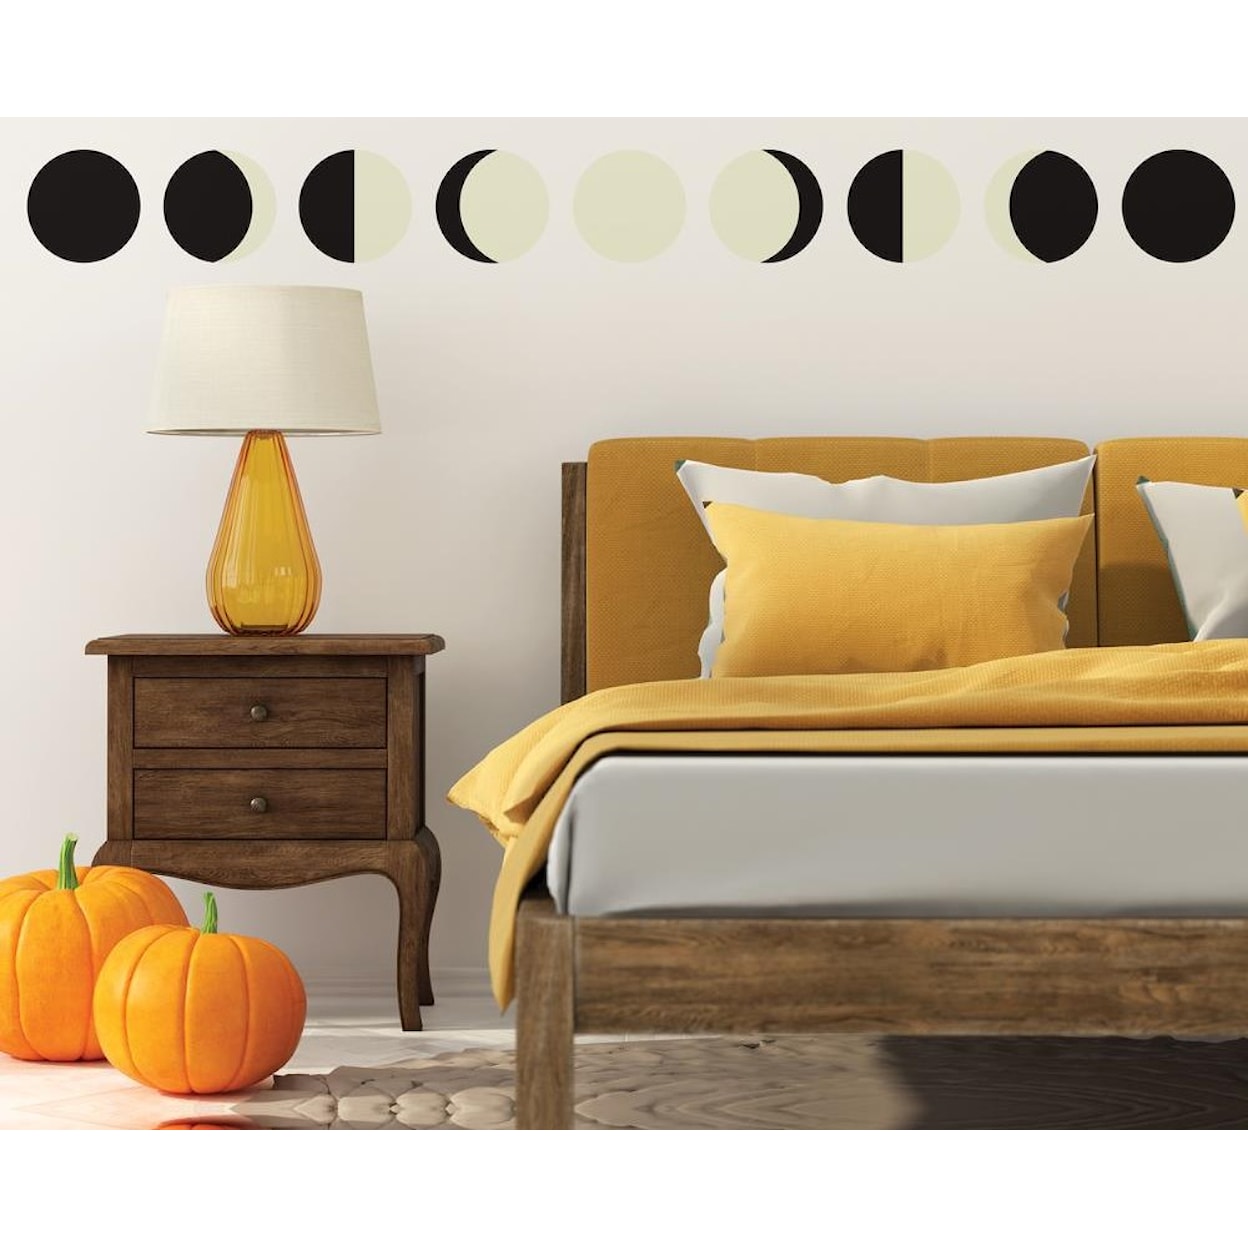 Tempaper Wall Decals Mystic Moon Phases